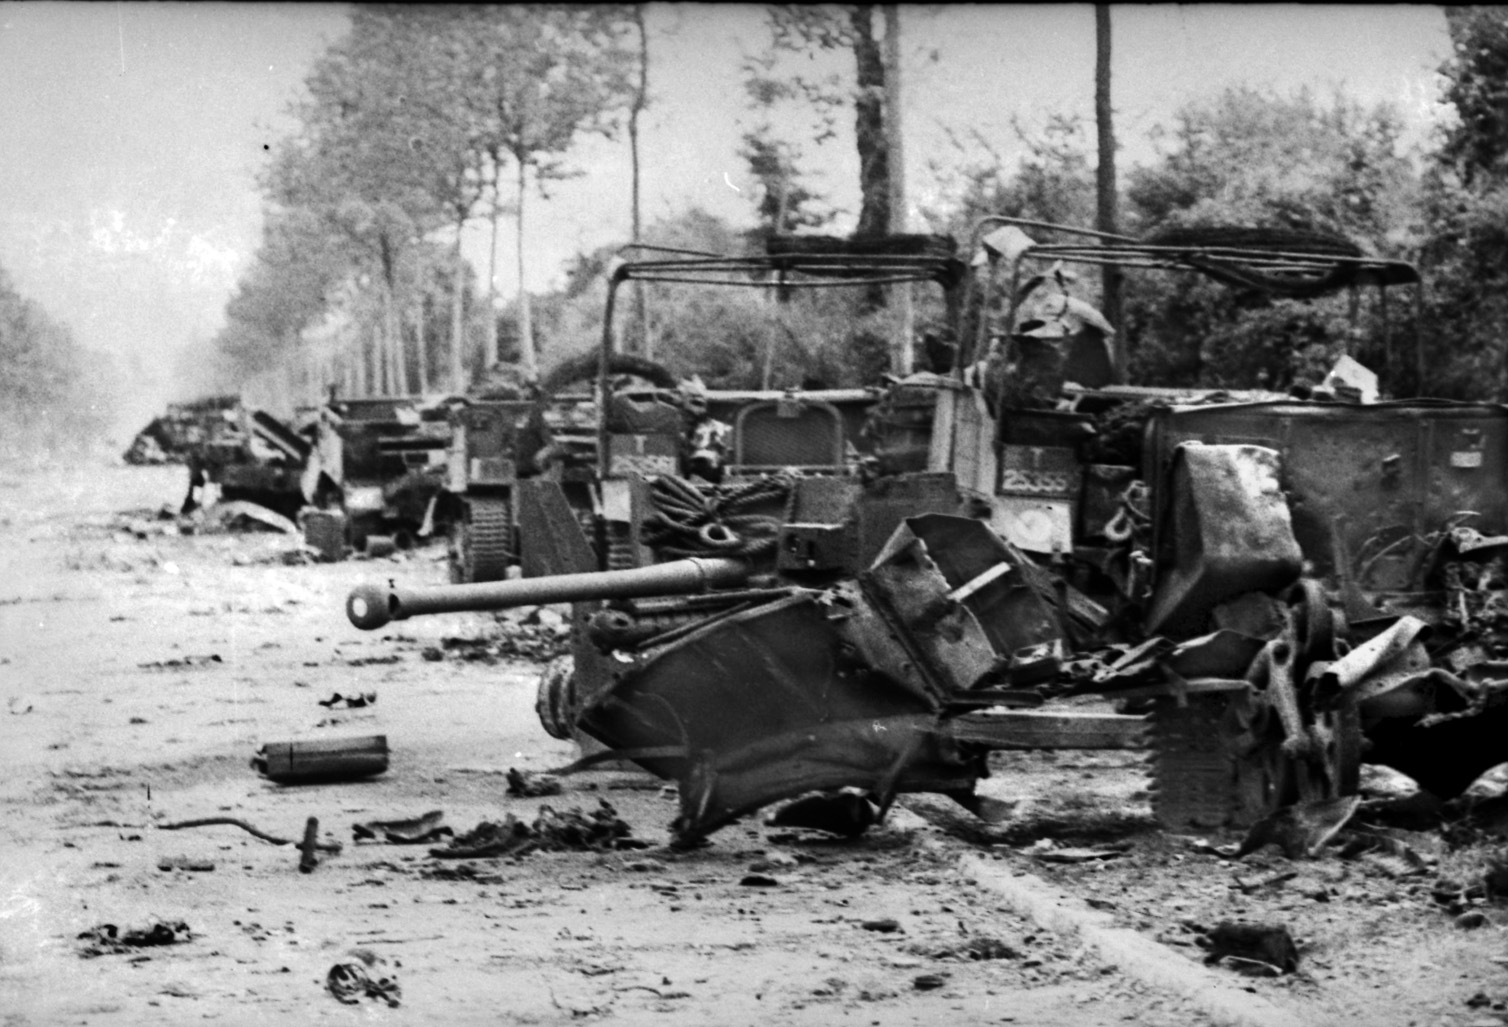 A column of British armored vehicles smolders in ruin after being blasted by Oberstürmführer Michael Wittmann's Tiger I tank. 